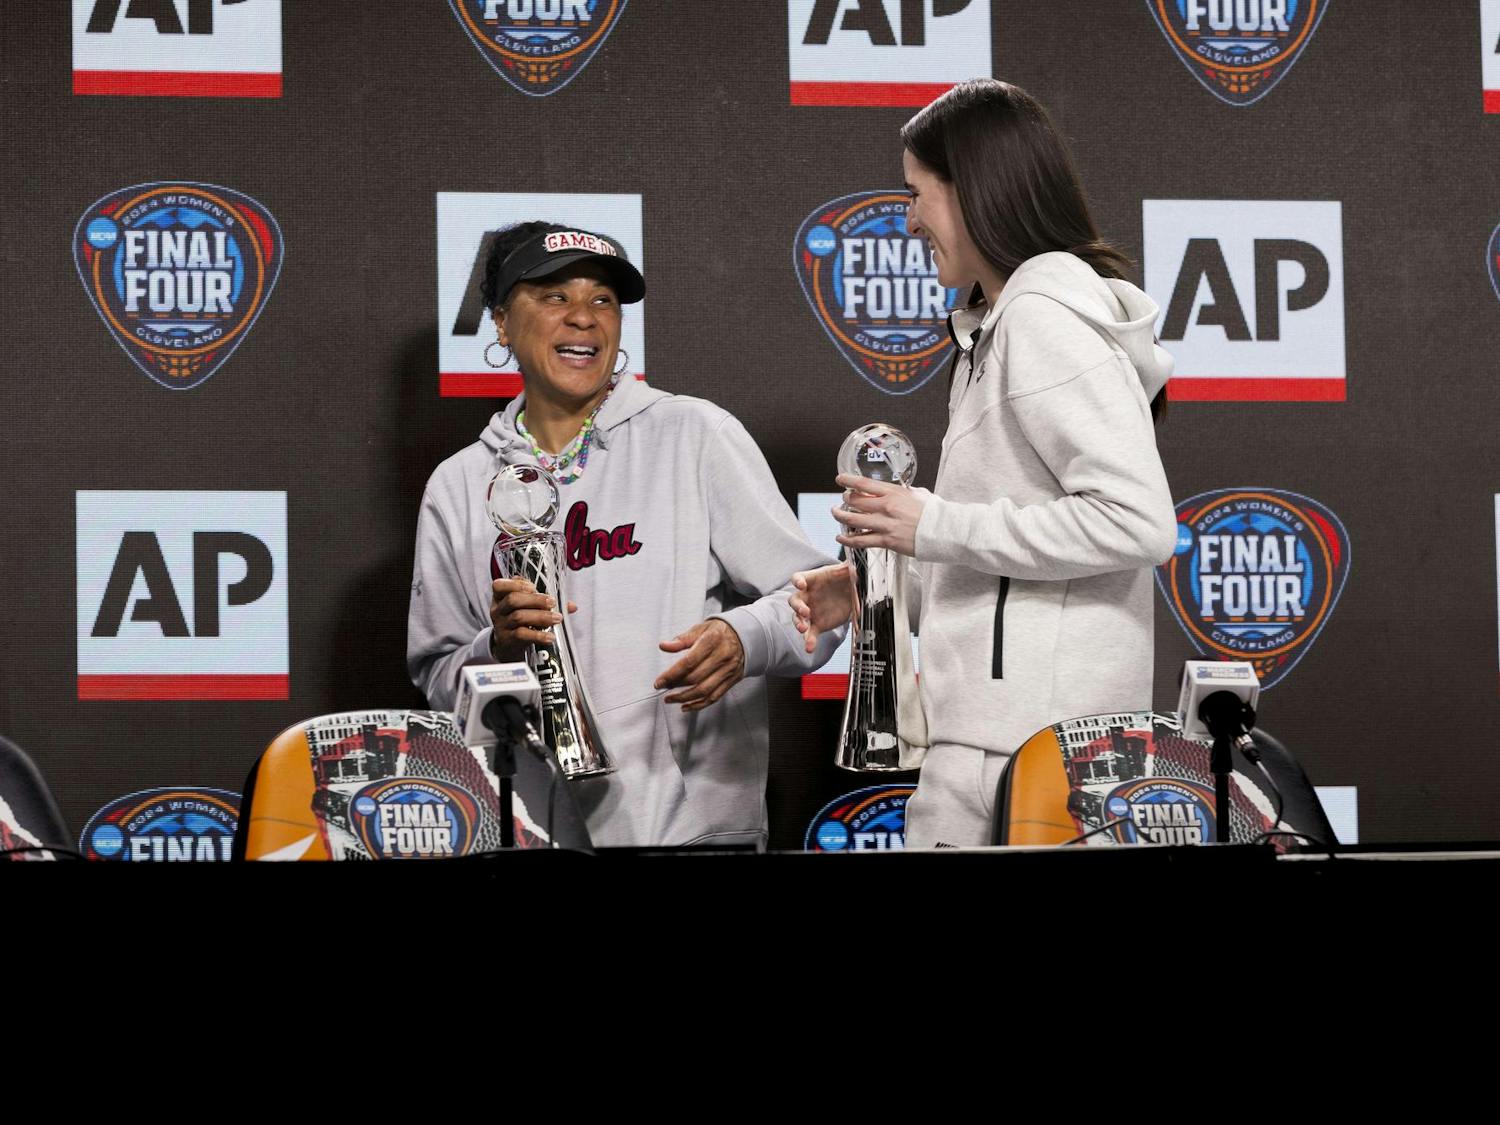 Gamecock women’s basketball head coach Dawn Staley (left) and Iowa senior guard Caitlin Clark (right) laugh while walking off stage after receiving their AP Coach and Player of the year awards, respectively. This is Staley's second time winning the AP Coach of the Year award. Staley also earned the Women's Basketball Coaches Association award for the third consecutive year and the fourth time in five years.